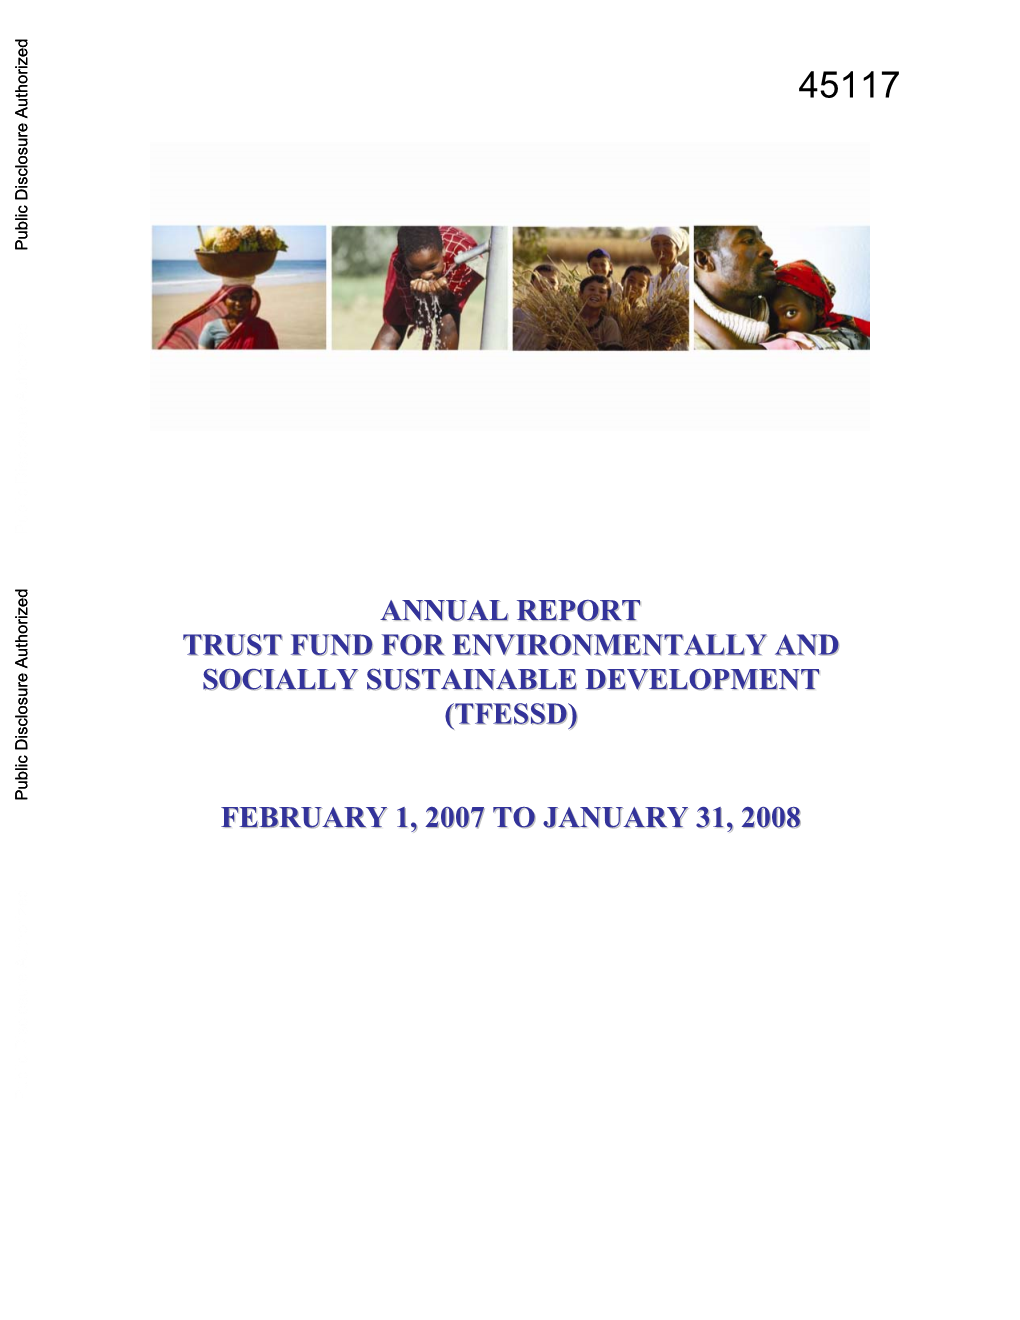 Annual Report Trust Fund for Environmentally and Socially